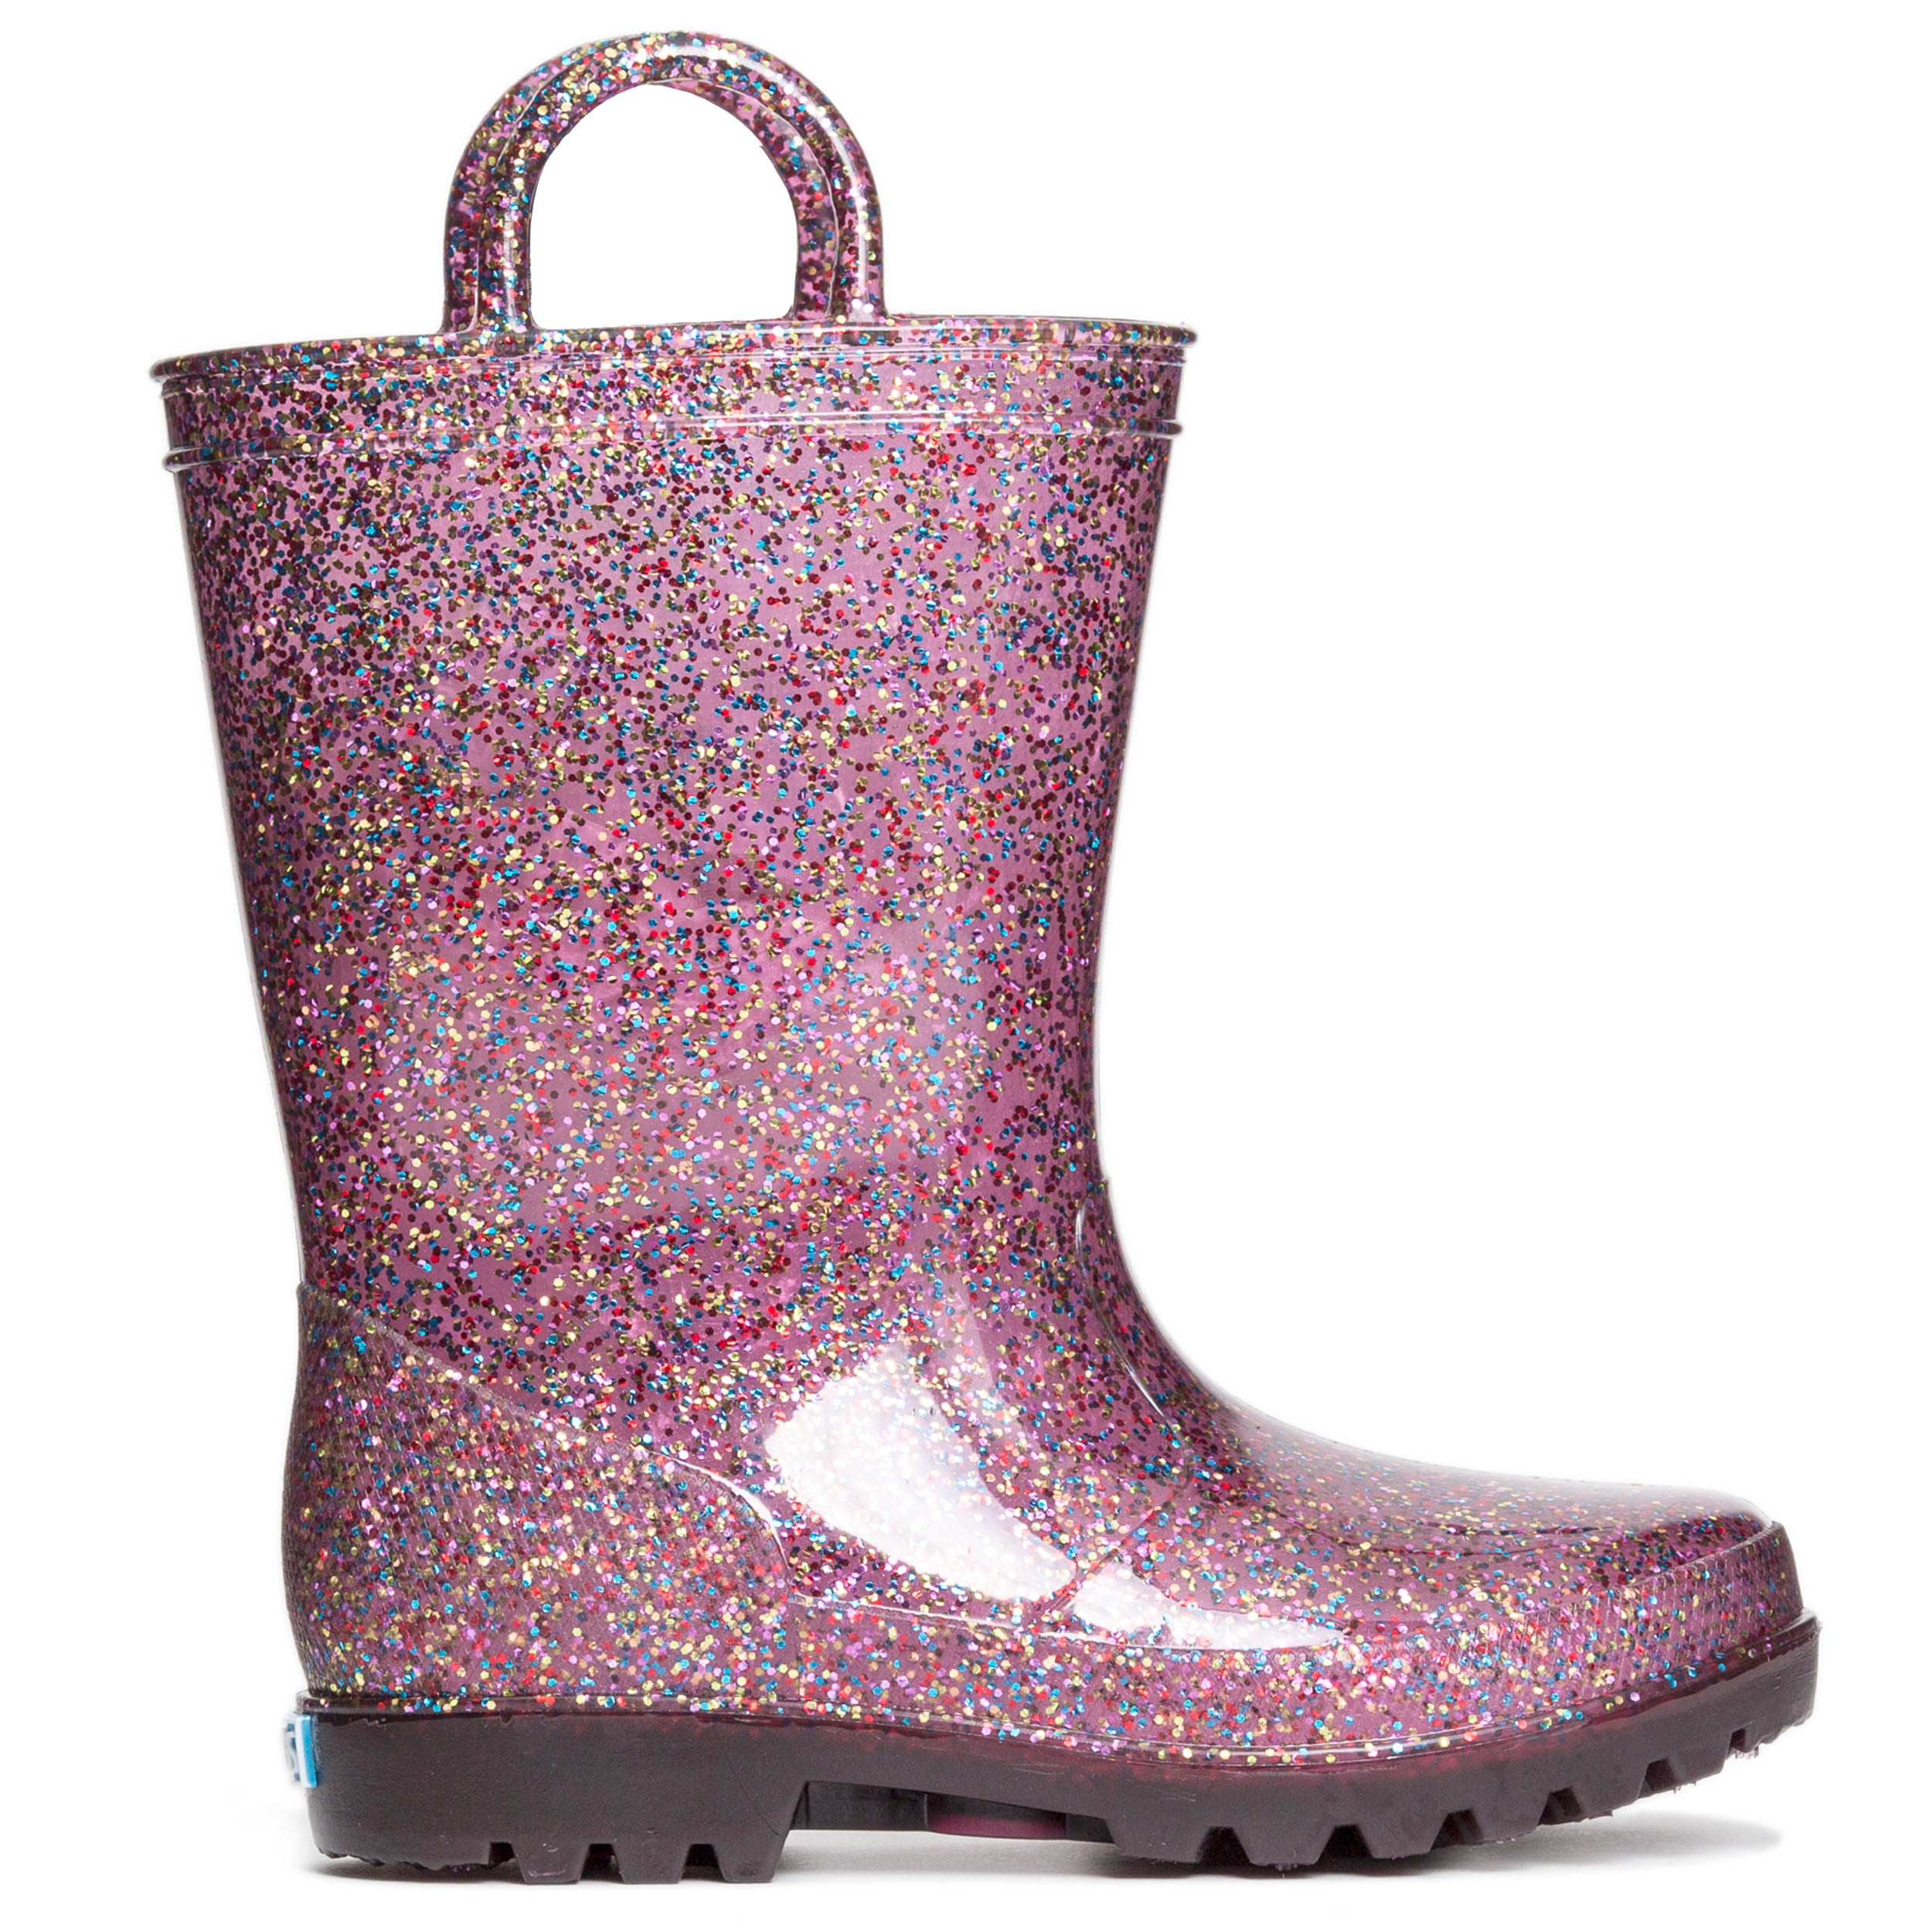 ZOOGS Kids Glitter Rain Boots for Girls and Toddlers, Multi Glitter, 2 ...